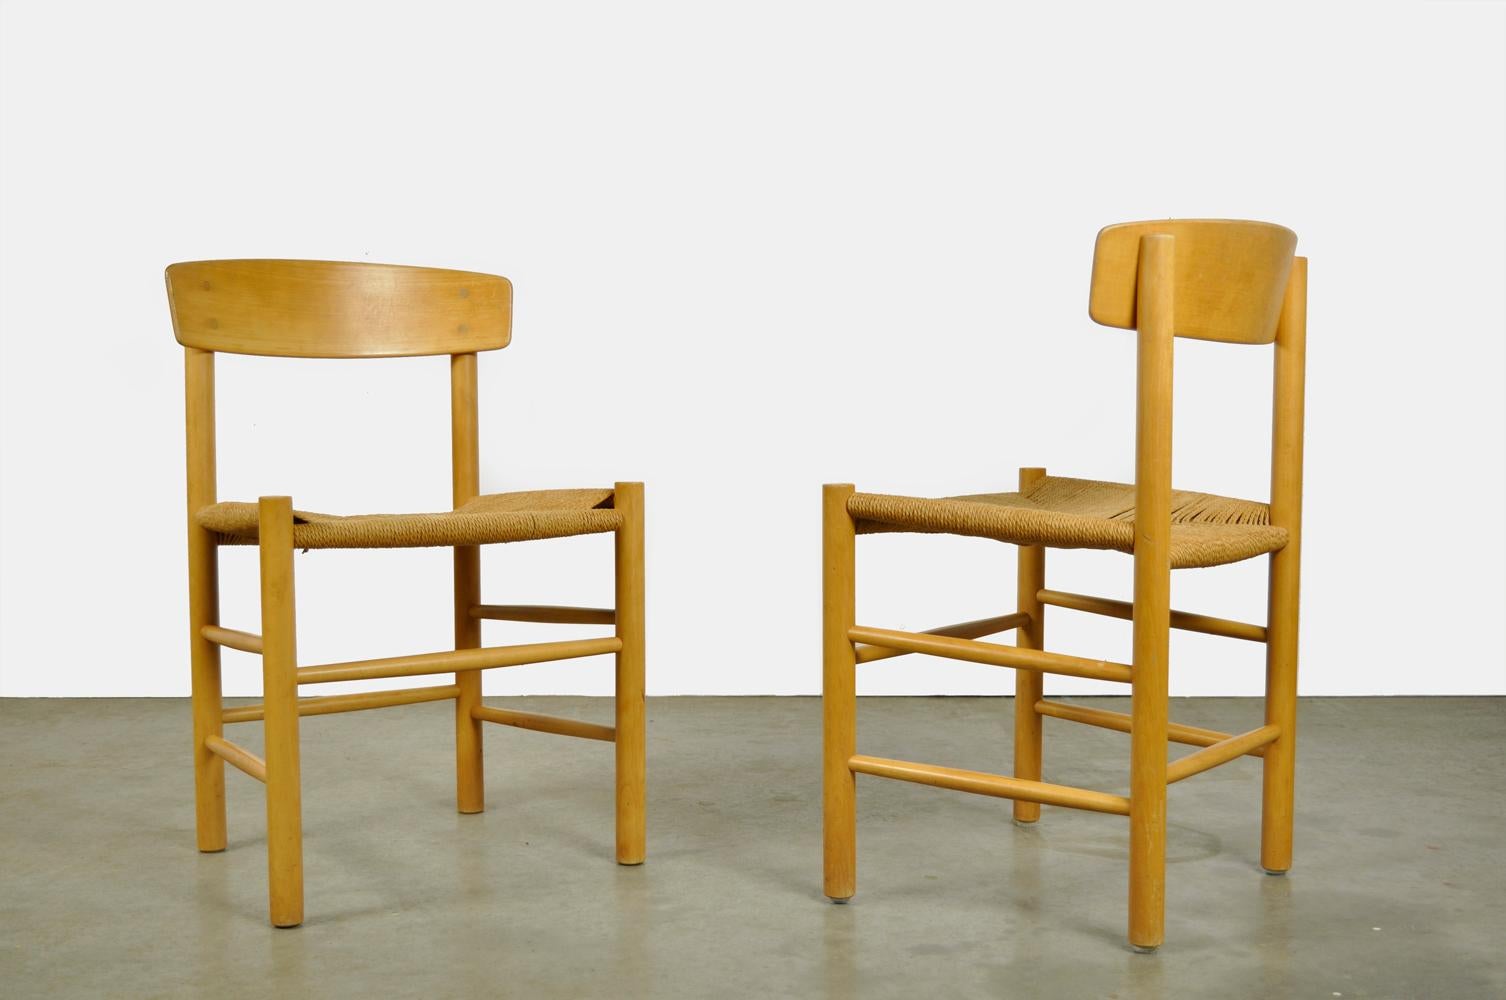 Set of 2 beech dining table chairs, model J39, designed by Borge Mogensen and produced by F.D.B. in Denmark 1970s.

“The peoples chair” has a beautiful oak frame and papercord (rope) seats. The seats are original.